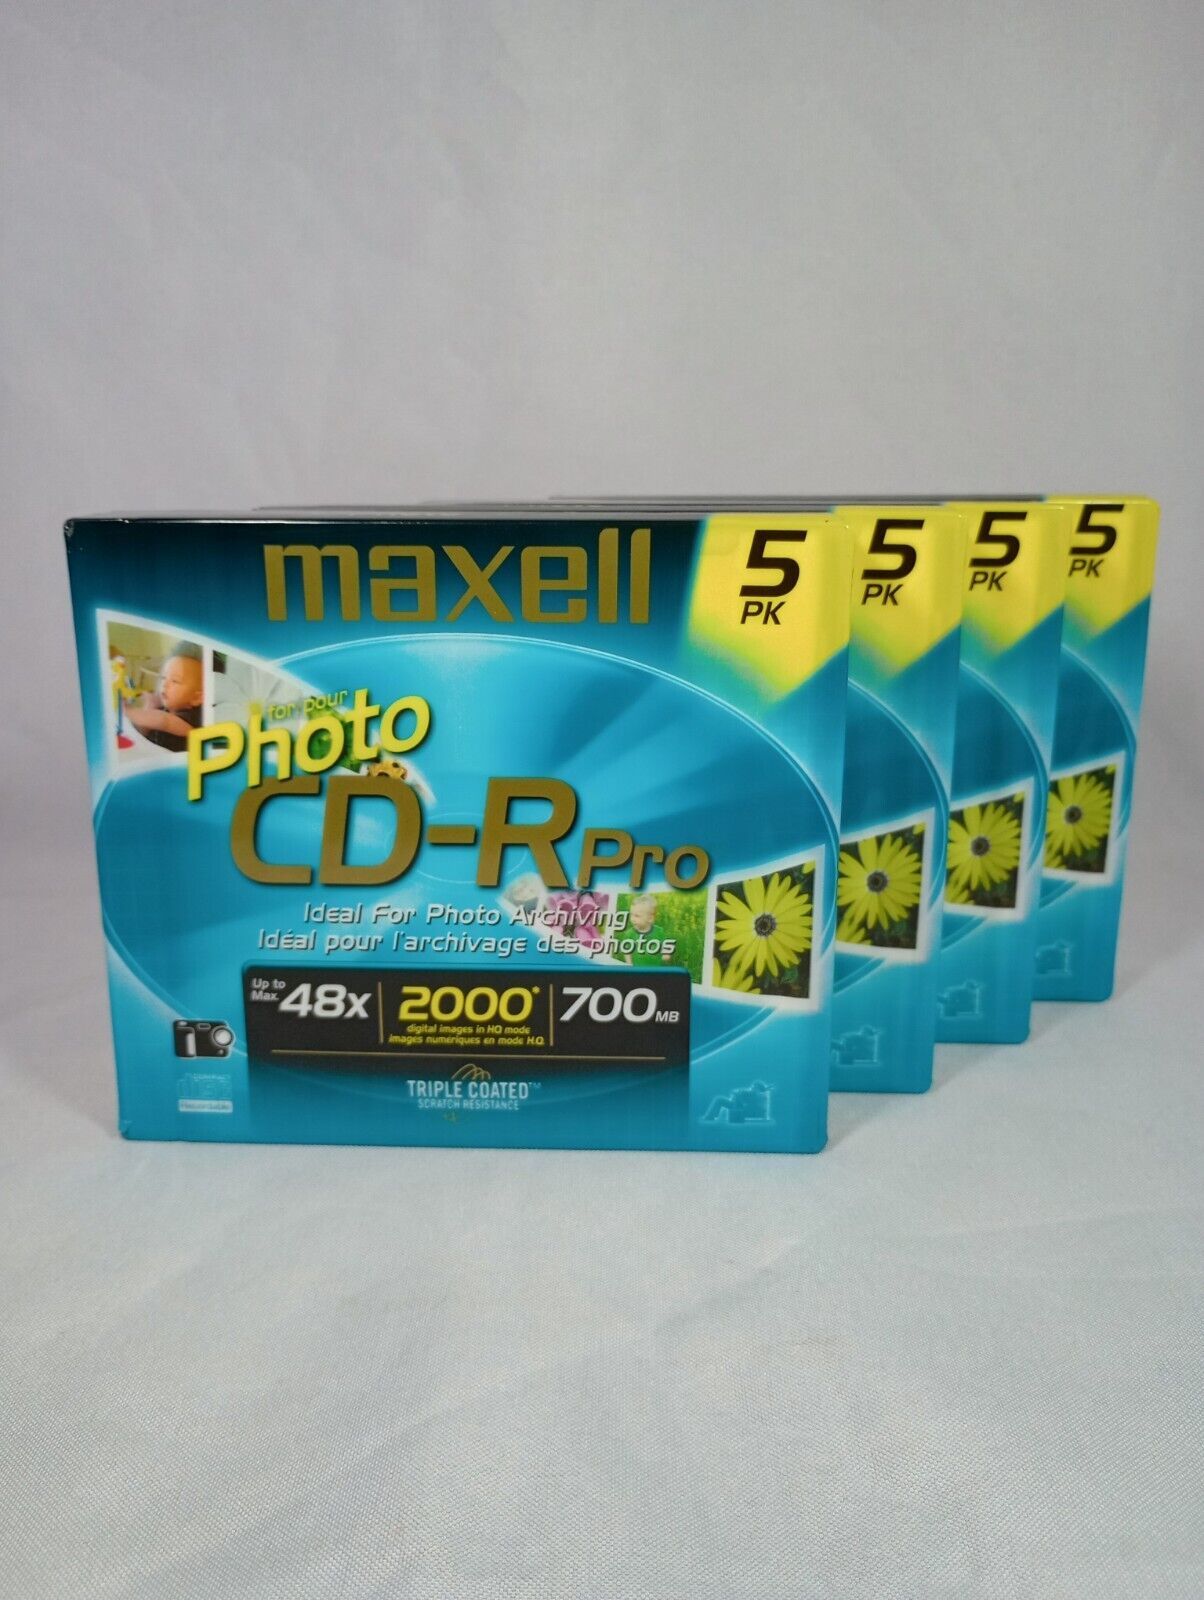 Maxell Photo CD-R Pro 48x 700mb 5 Pack Triple Coated New Sealed Lot 4 20 Total